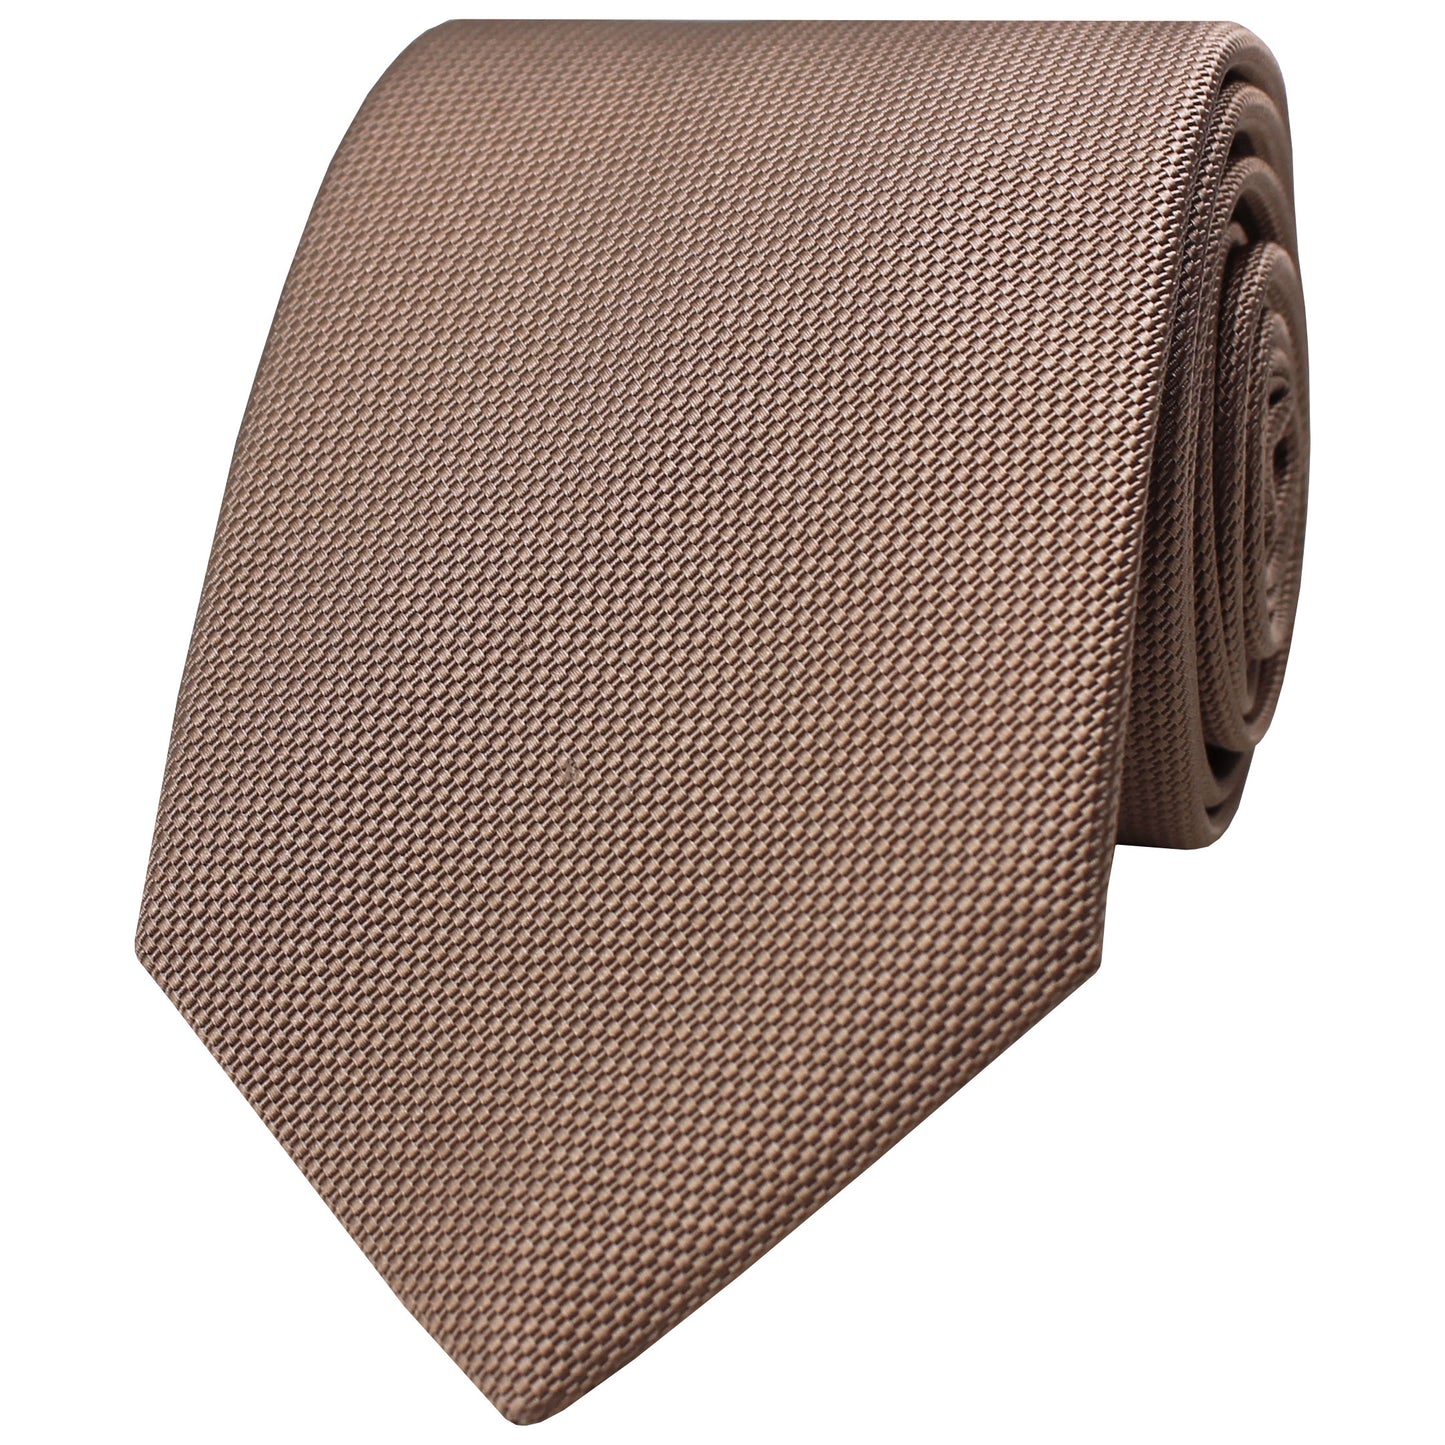 Tan Woven Textured Solid